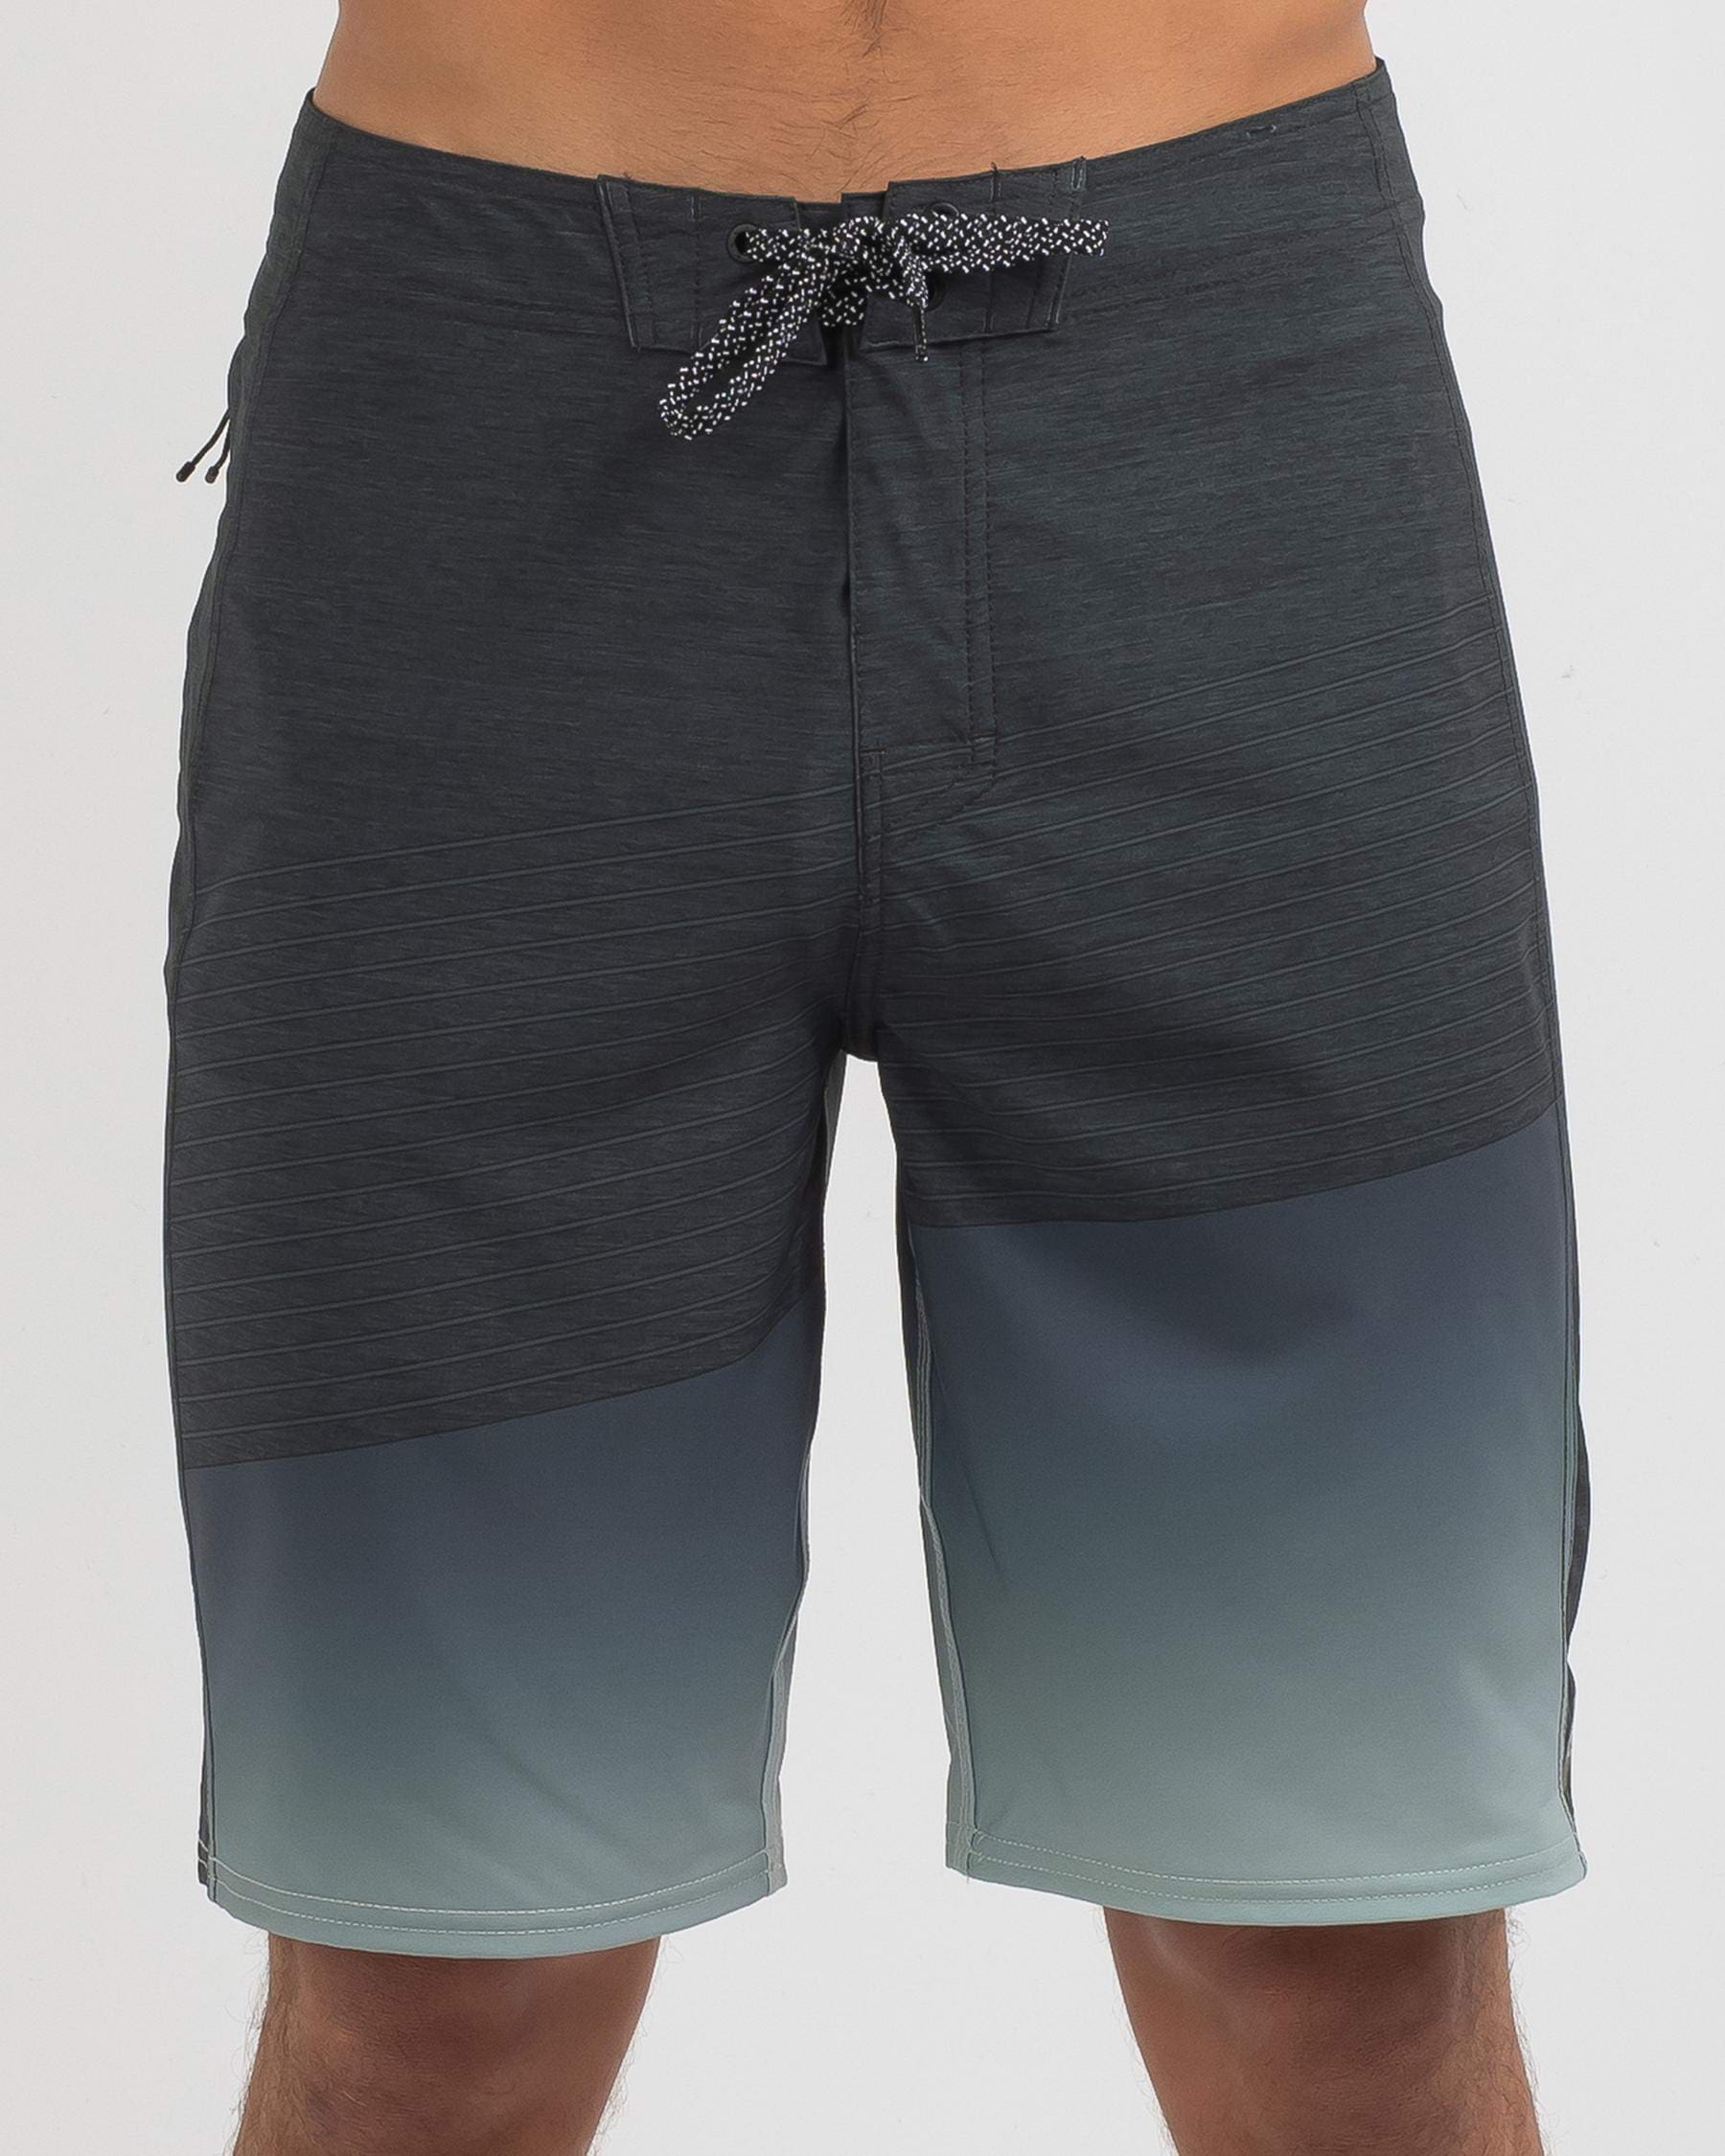 Rip Curl Mirage Inverted Board Shorts In Washed Black - Fast Shipping ...